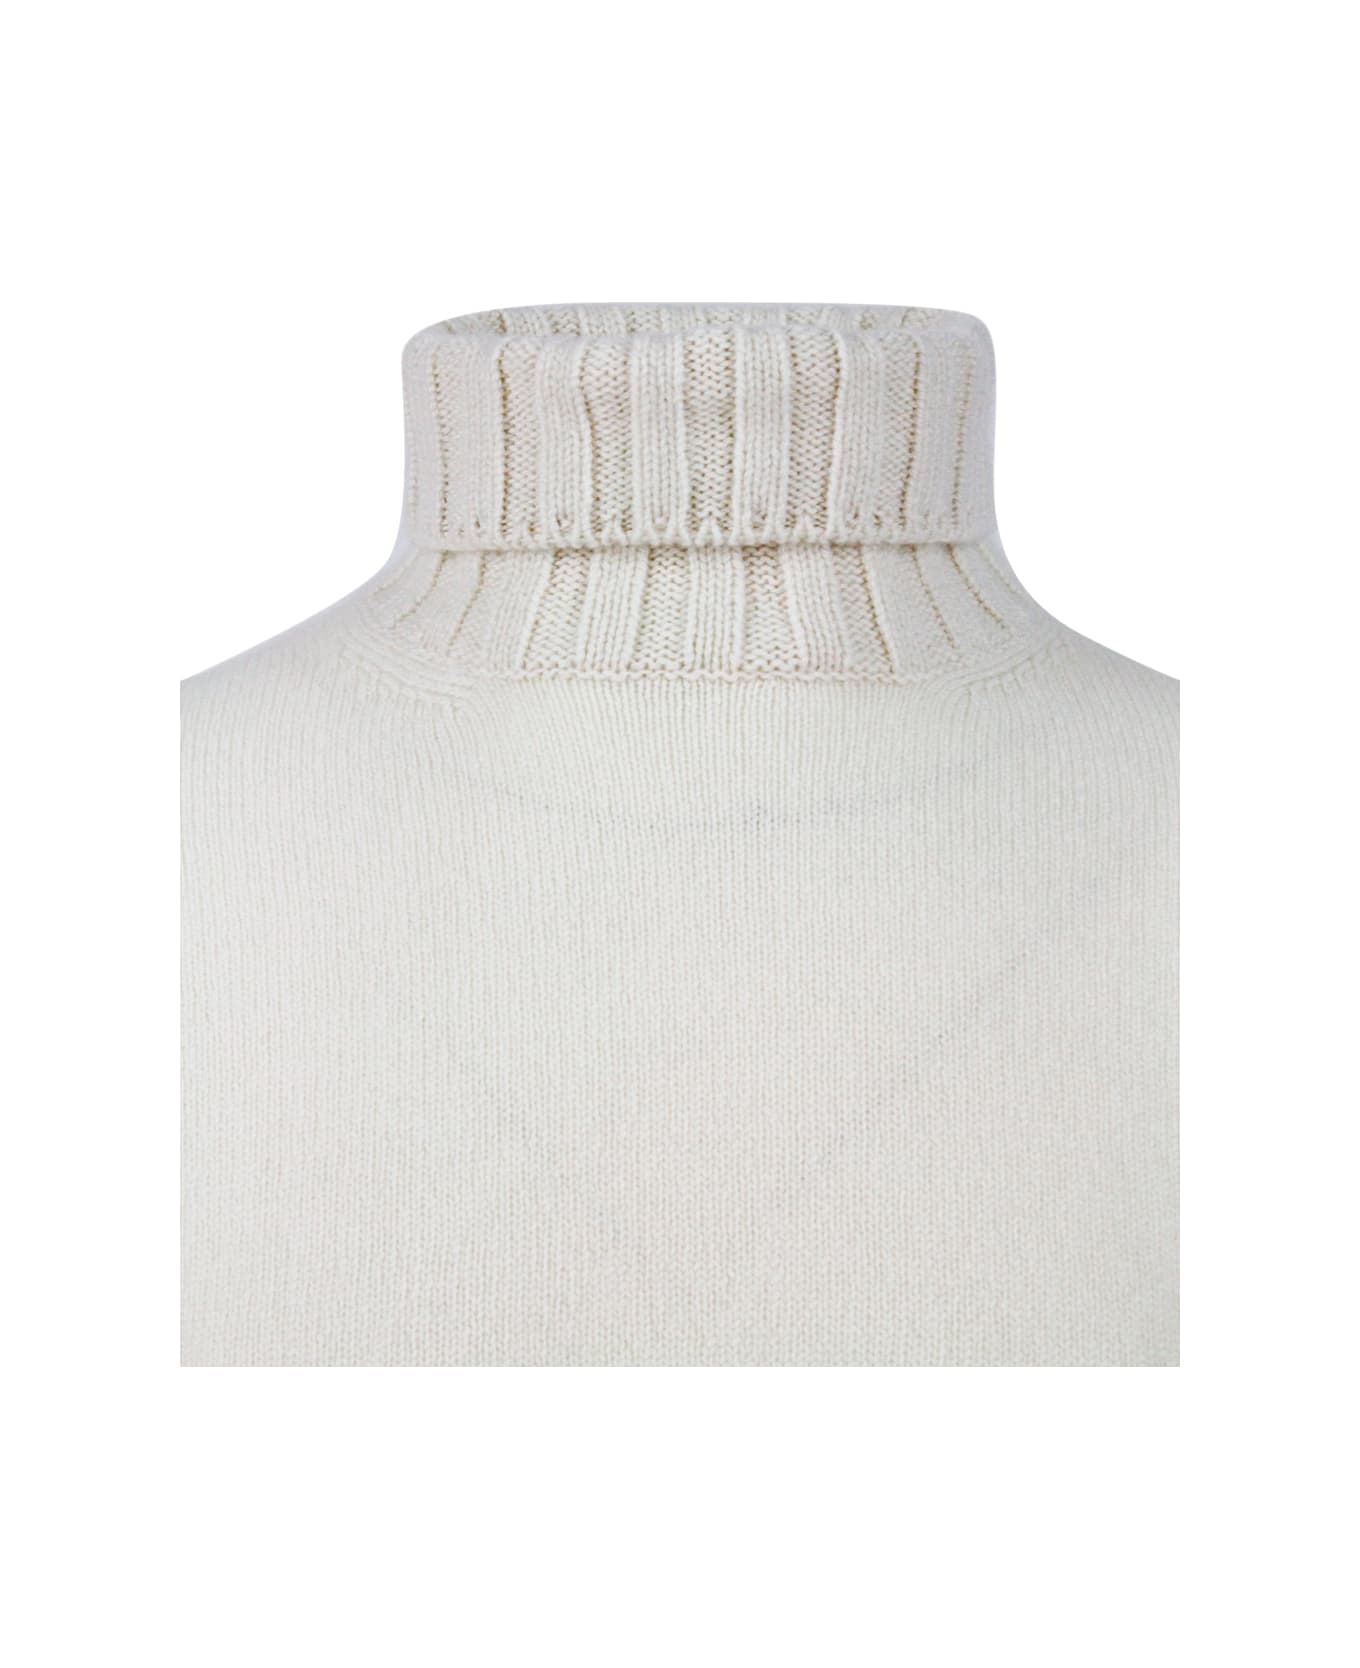 Sonrisa Turtleneck Sweater In Fine And Very Soft Cashmere Fleece With Flat Rib Knit On The Neck - Cream